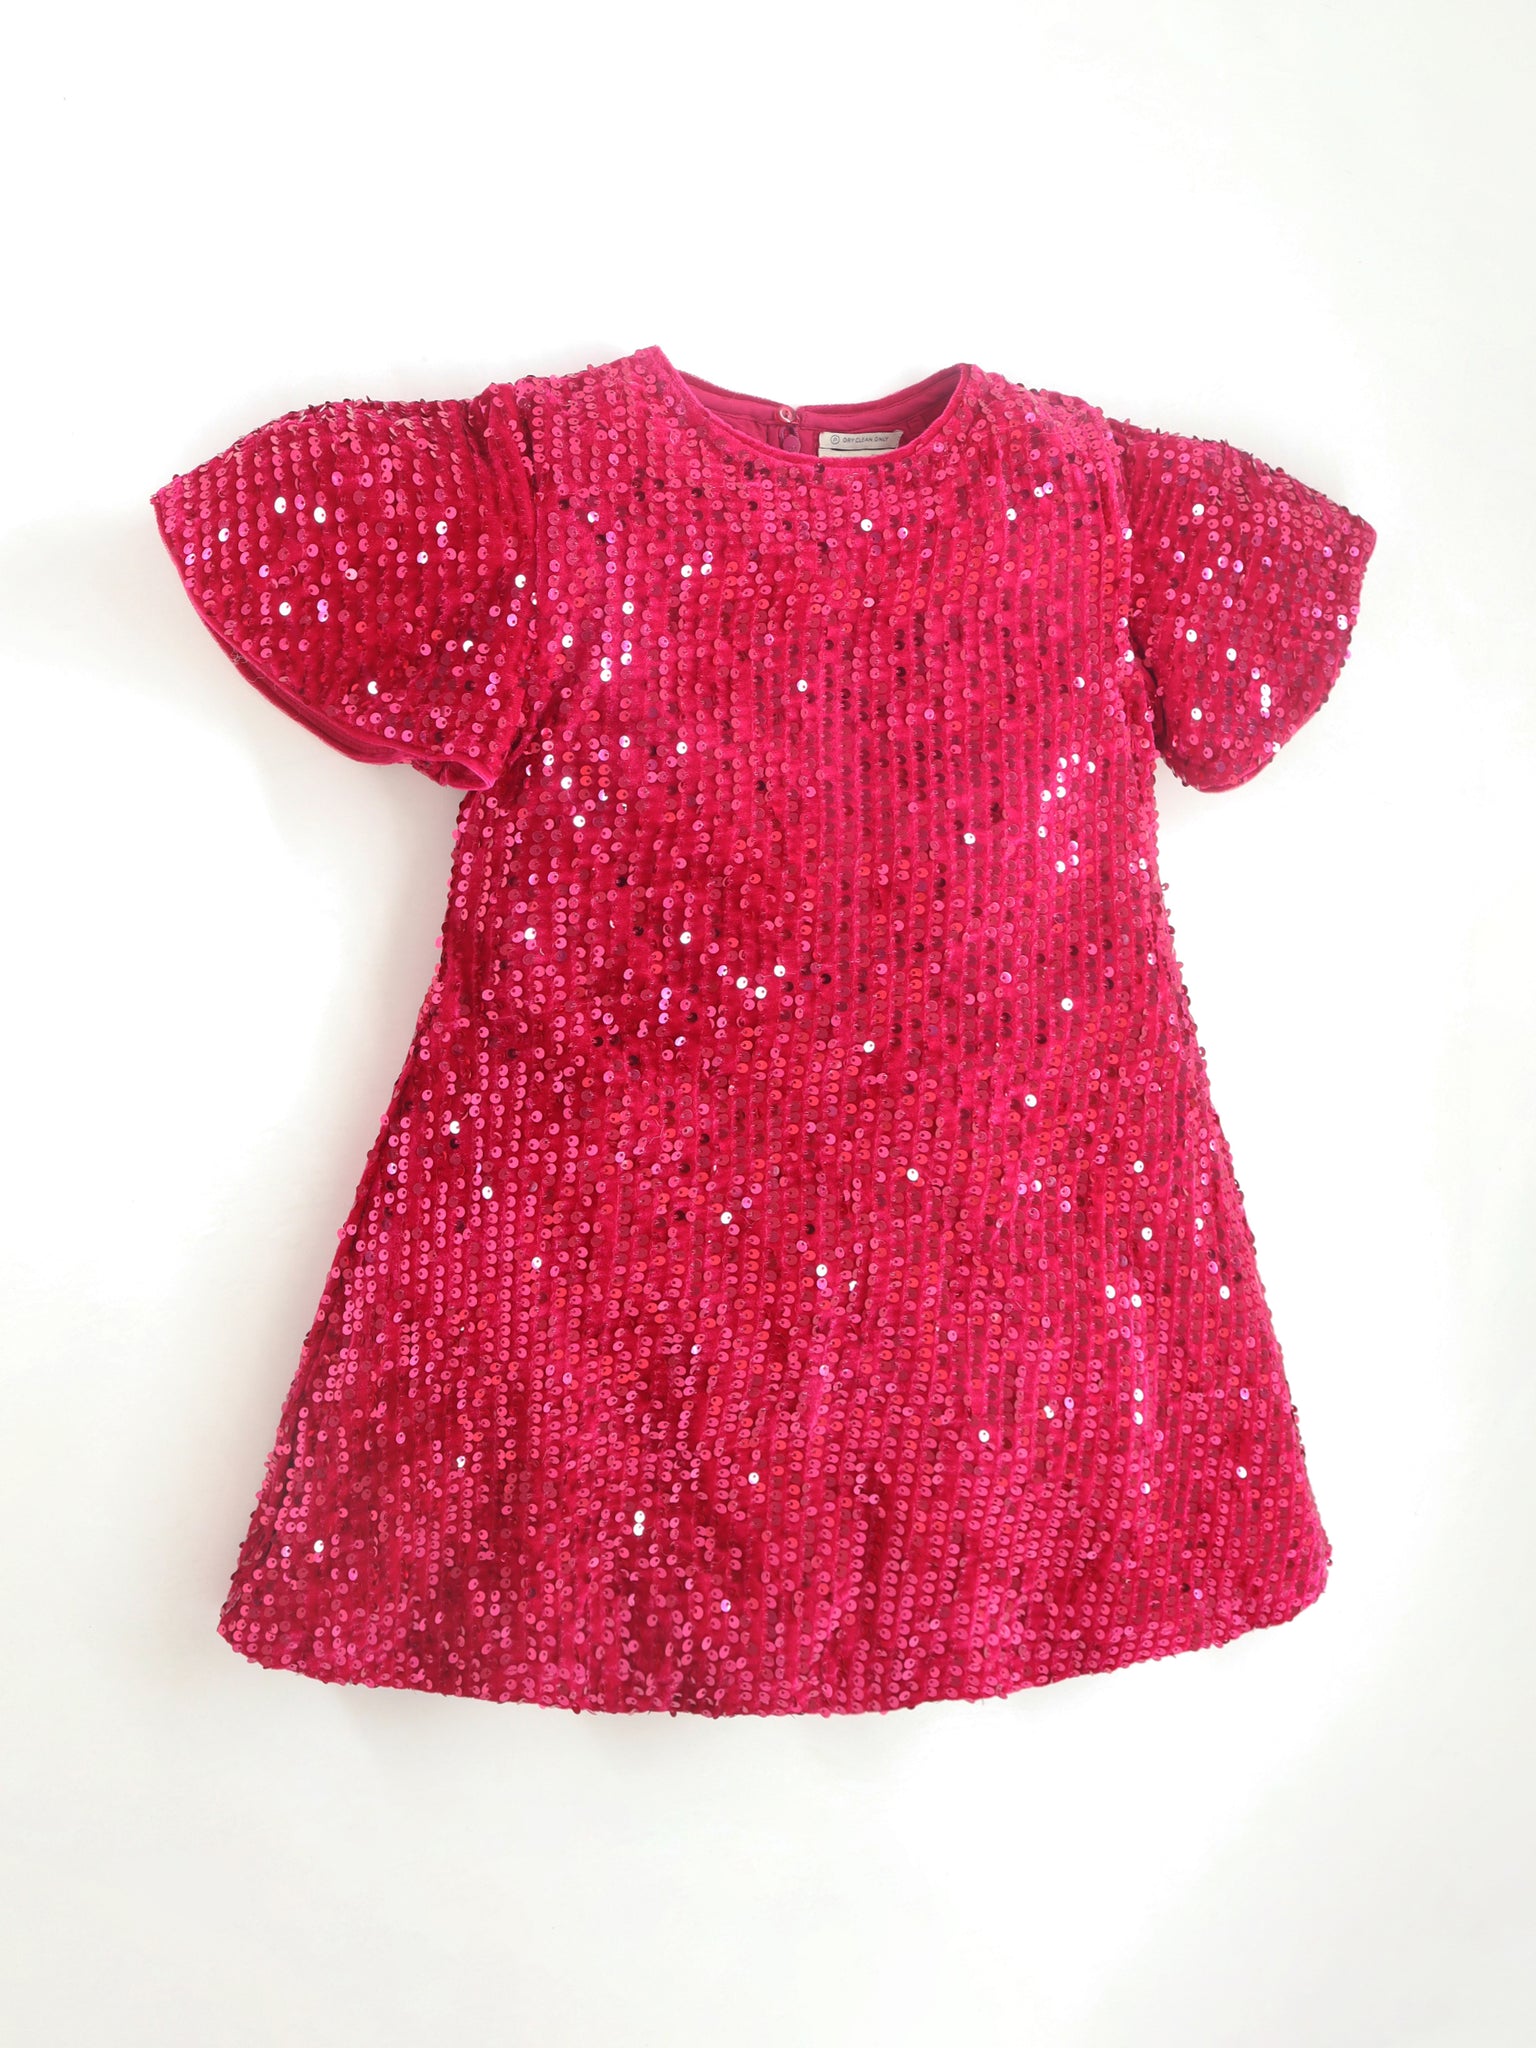 Party wear Grey Cotton Blend and Half Sleeves with Zipper Closure Fit & Flared Sequin Dress For Girls